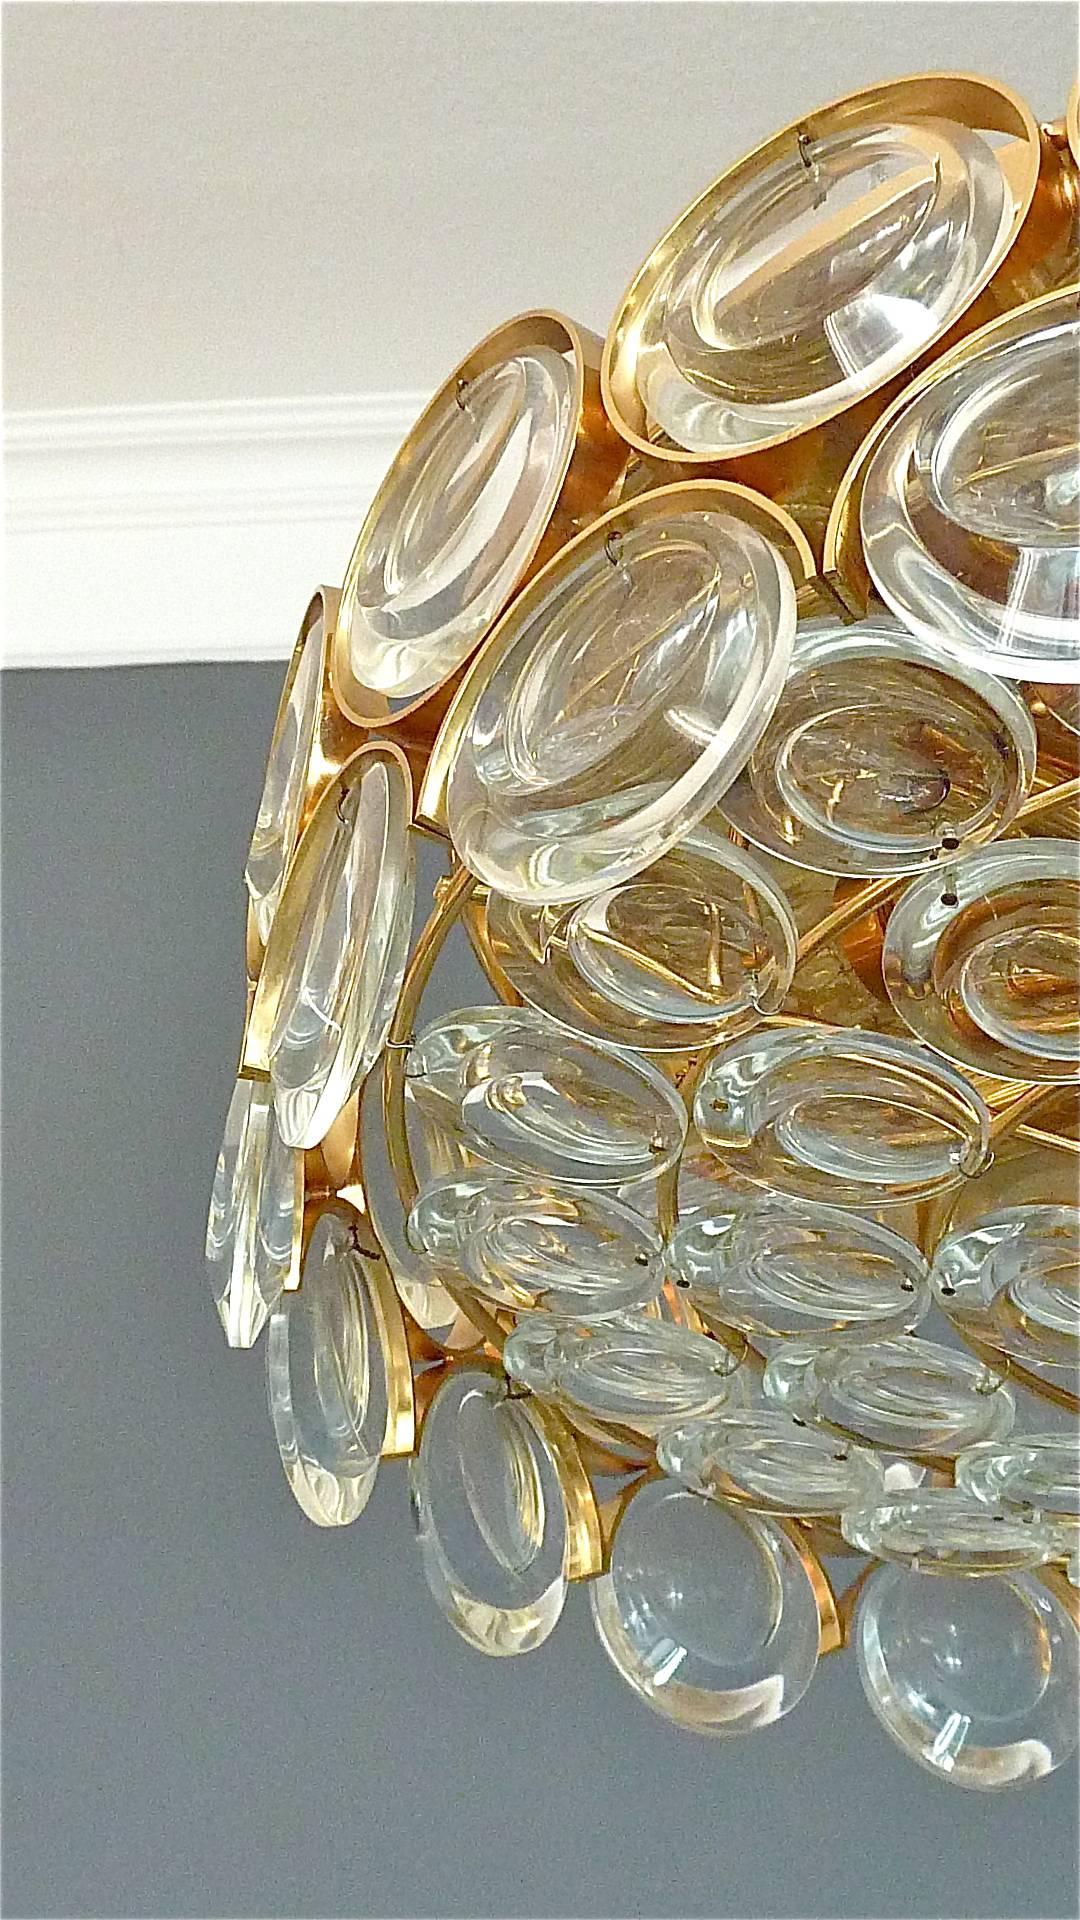 A stunning midcentury gilt flush mount or ceiling chandelier with round polished optical crystal glass lenses manufactured by Palwa, Germany around 1960s-1970s. The beautiful hand-crafted chandelier with concentric circles in Op Art / Pop Art Style